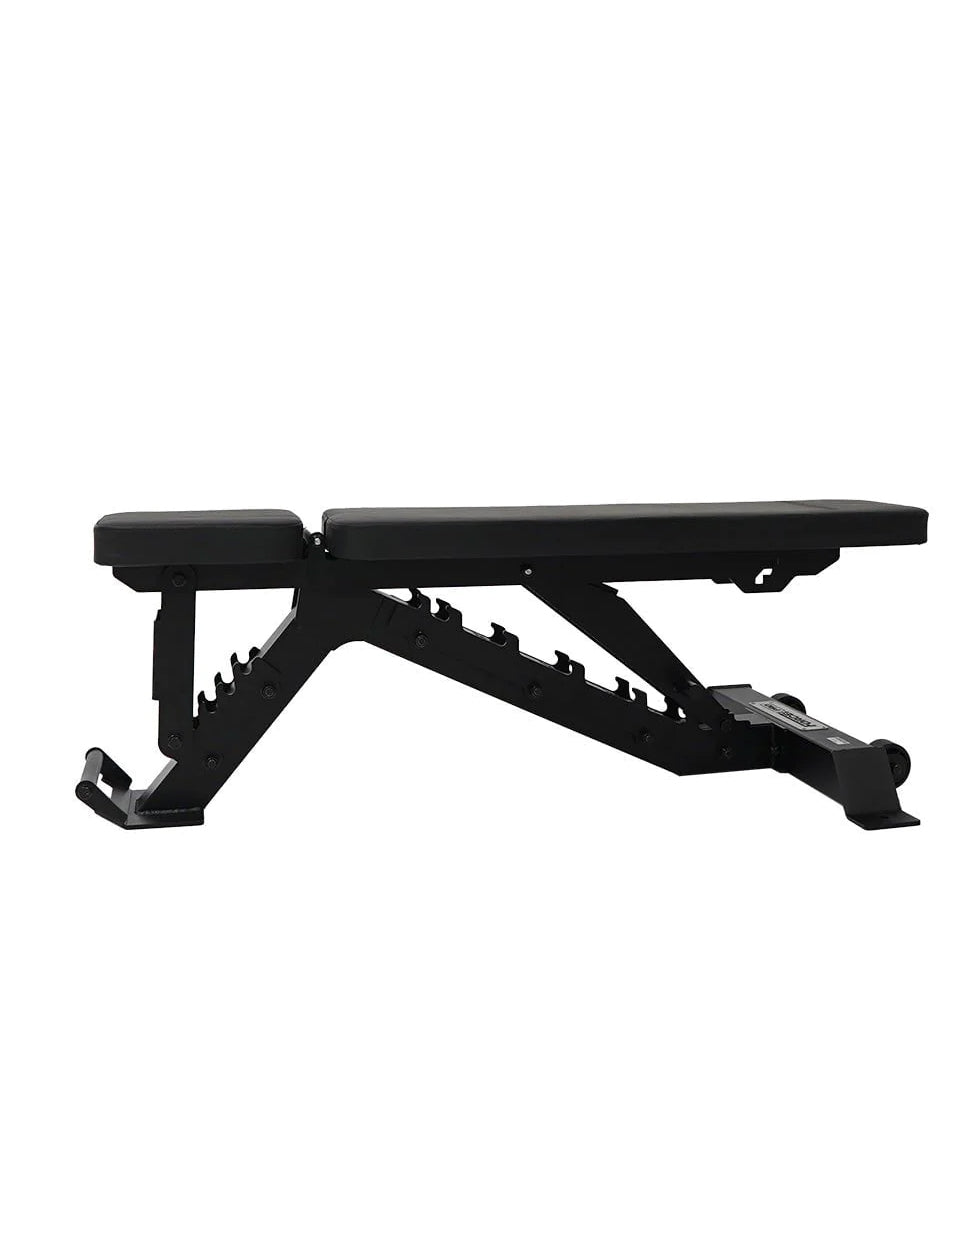 1441 Fitness Series FID Bench - A8008